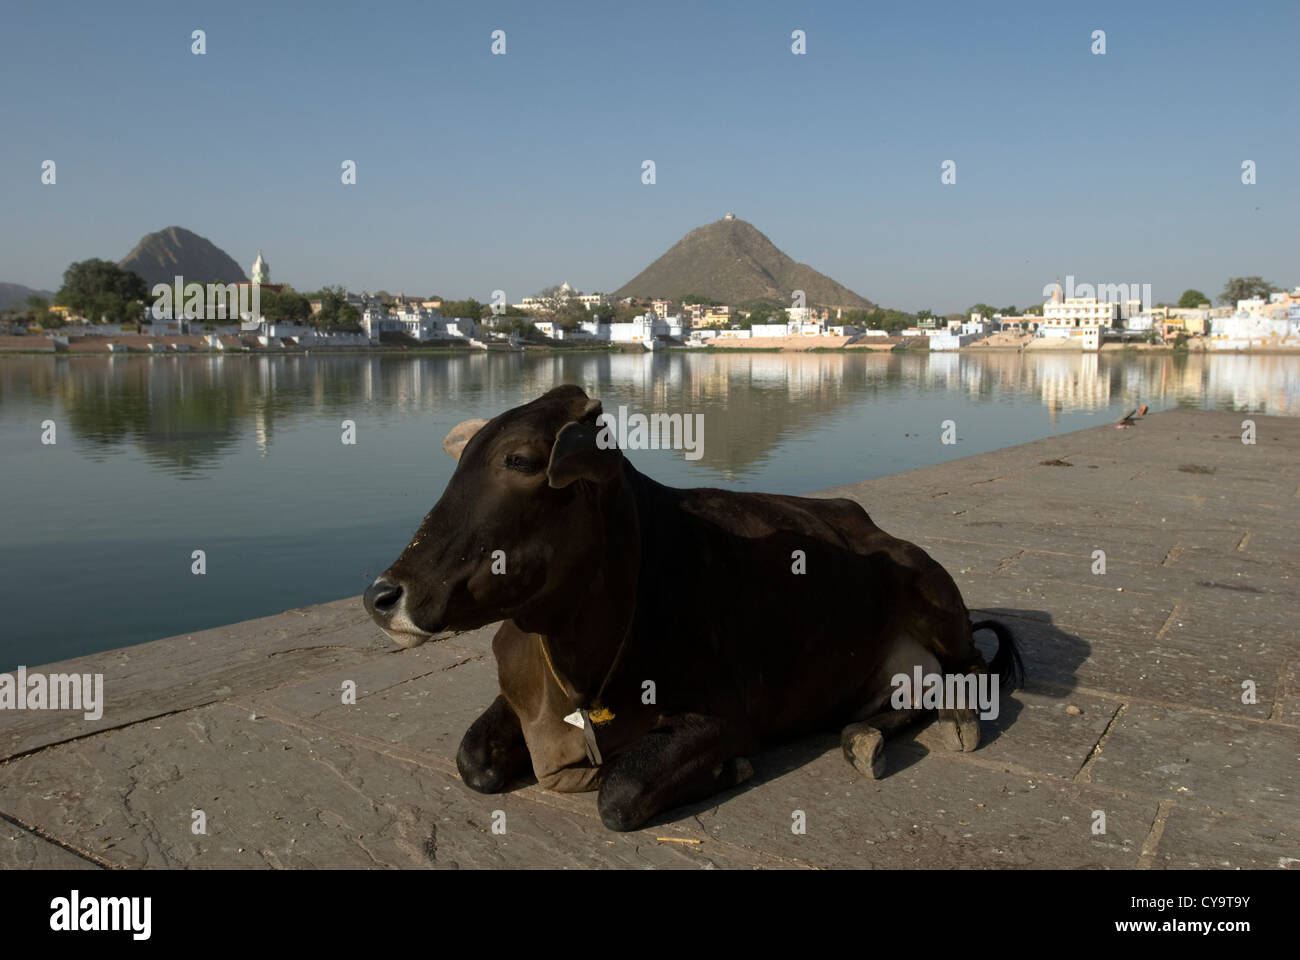 An Indian sacred cow rests on the shores of Puskar's holy lake. Pushkar, Rajasthan, India Stock Photo